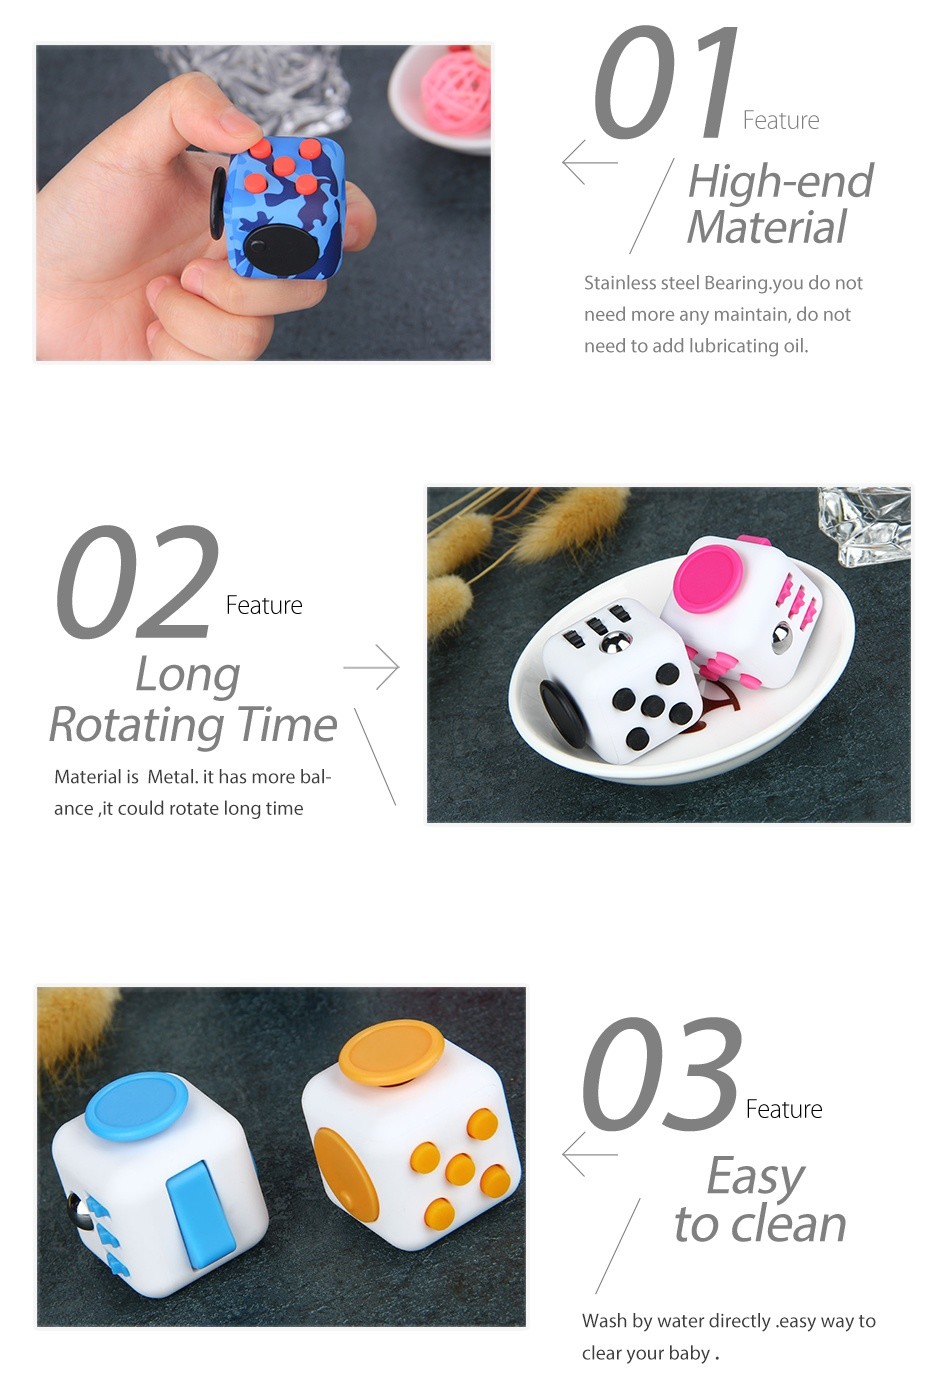 ABS Fidget Cube Stress Relief Focus Toy 07 Feature High end Material Stainless steel Bearing you do not need more any maintain  do no need to add lubricating o 02 eature ong Rotating Time Material is Metal  it has more ba ance it could rotate long time 03 eature Easy to clean ash by water directly easy way to clear your baby